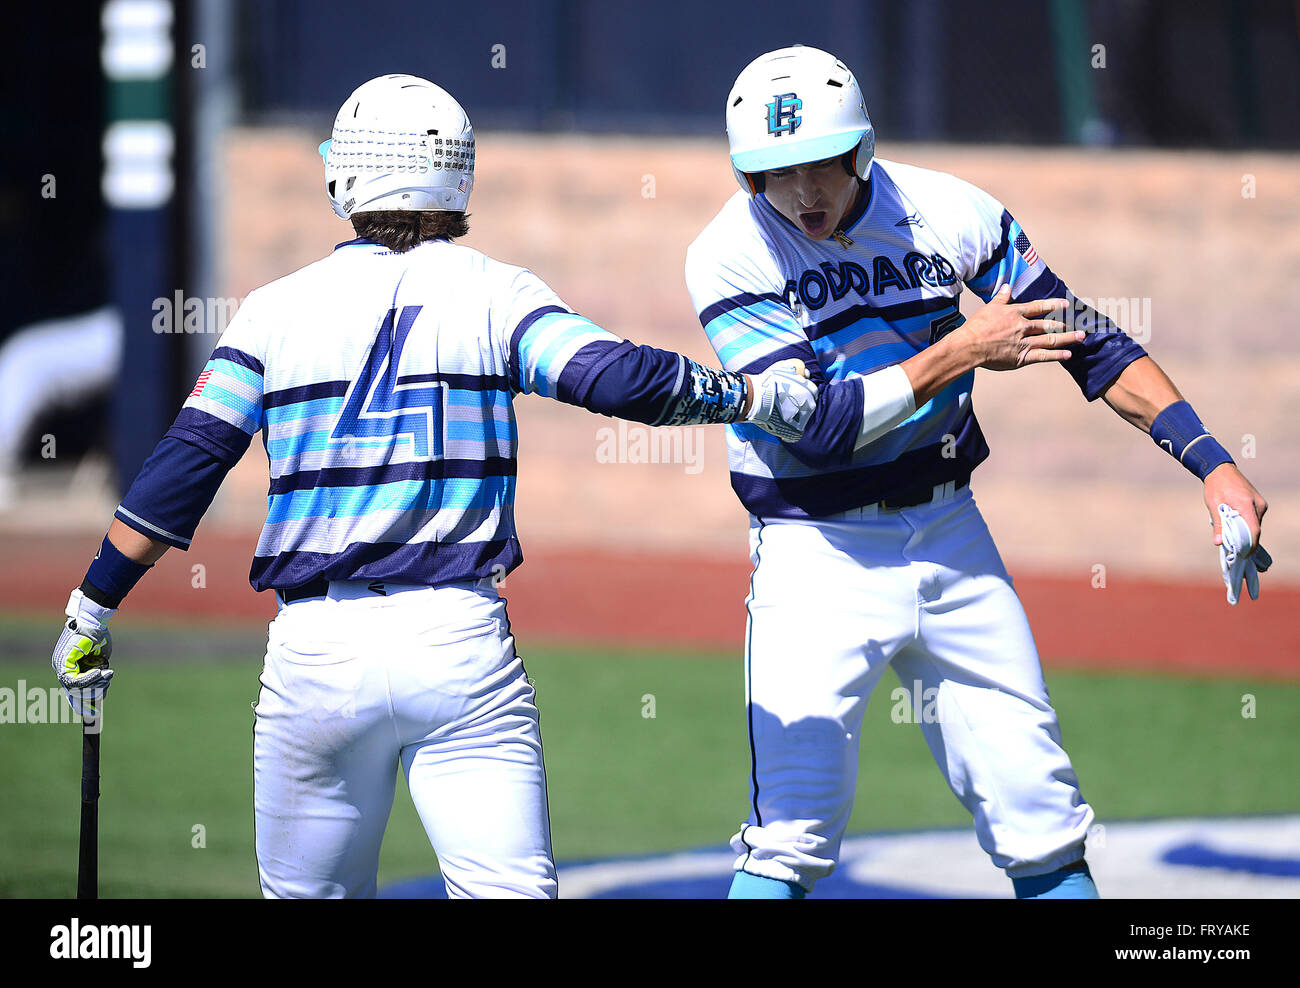 Albuquerque, NEW MEXICO, USA. 24th Mar, 2016. 032416 .Goddard's Mitch Naylor, left congratulates teammate Cameron.Stevenson, after Stevenson scored against Cleveland High School.Photographed on Thursday March 24, 2016. Adolphe Pierre-Louis/JOURNAL. © Adolphe Pierre-Louis/Albuquerque Journal/ZUMA Wire/Alamy Live News Stock Photo